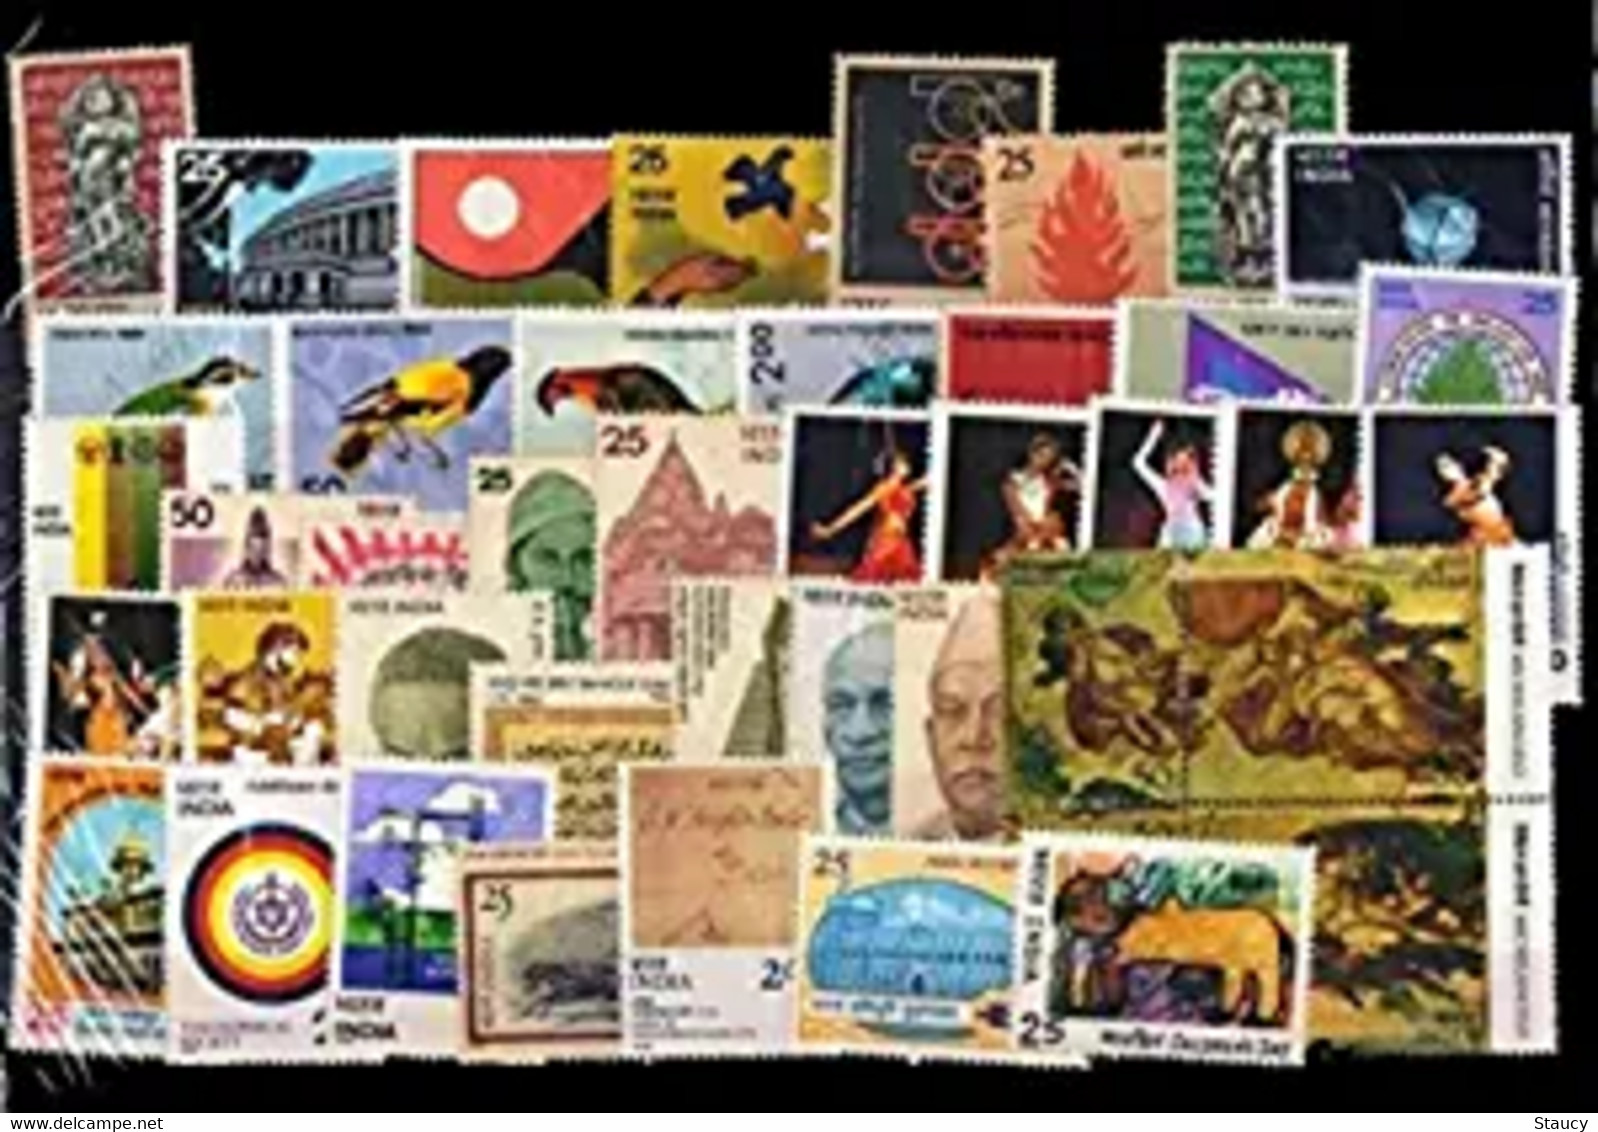 India 1975 Complete Year Pack / Set / Collection Total 43 Stamps (No Missing) MNH As Per Scan - Años Completos